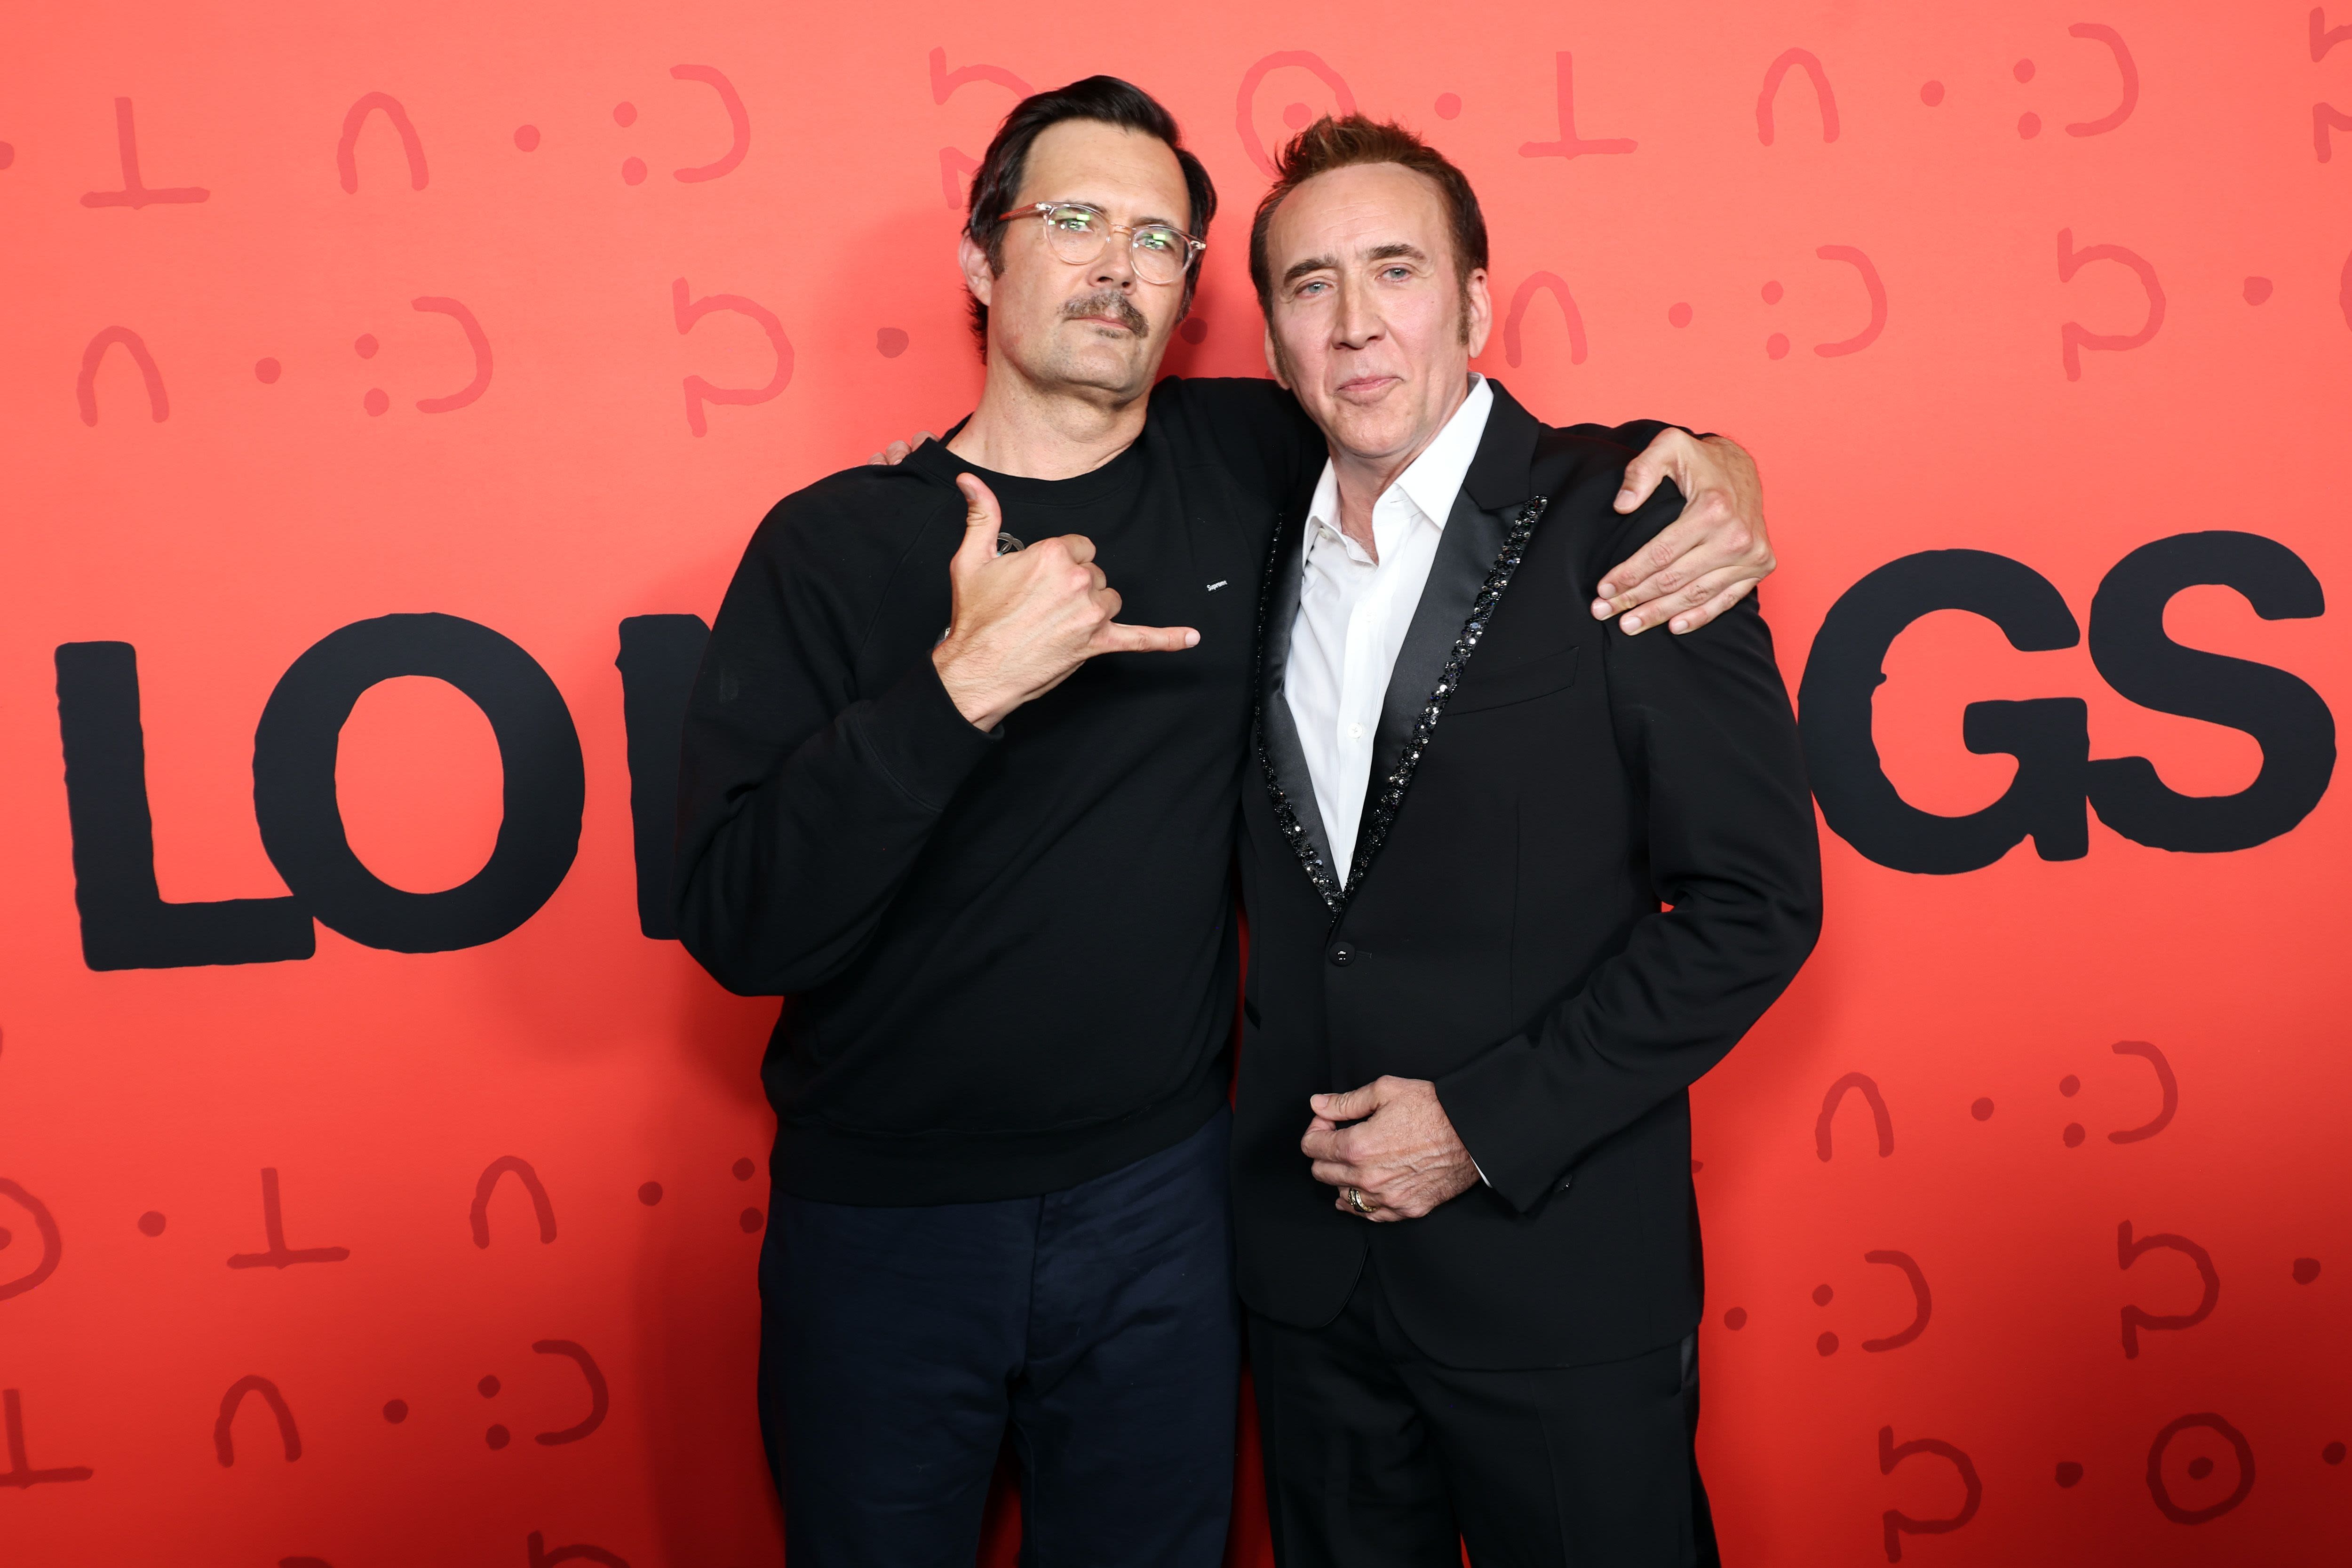 ‘Longlegs’ Director Says Nicolas Cage Stayed “Very Focused” on Character Between Takes But Without “Any Sort of Method-Acting...